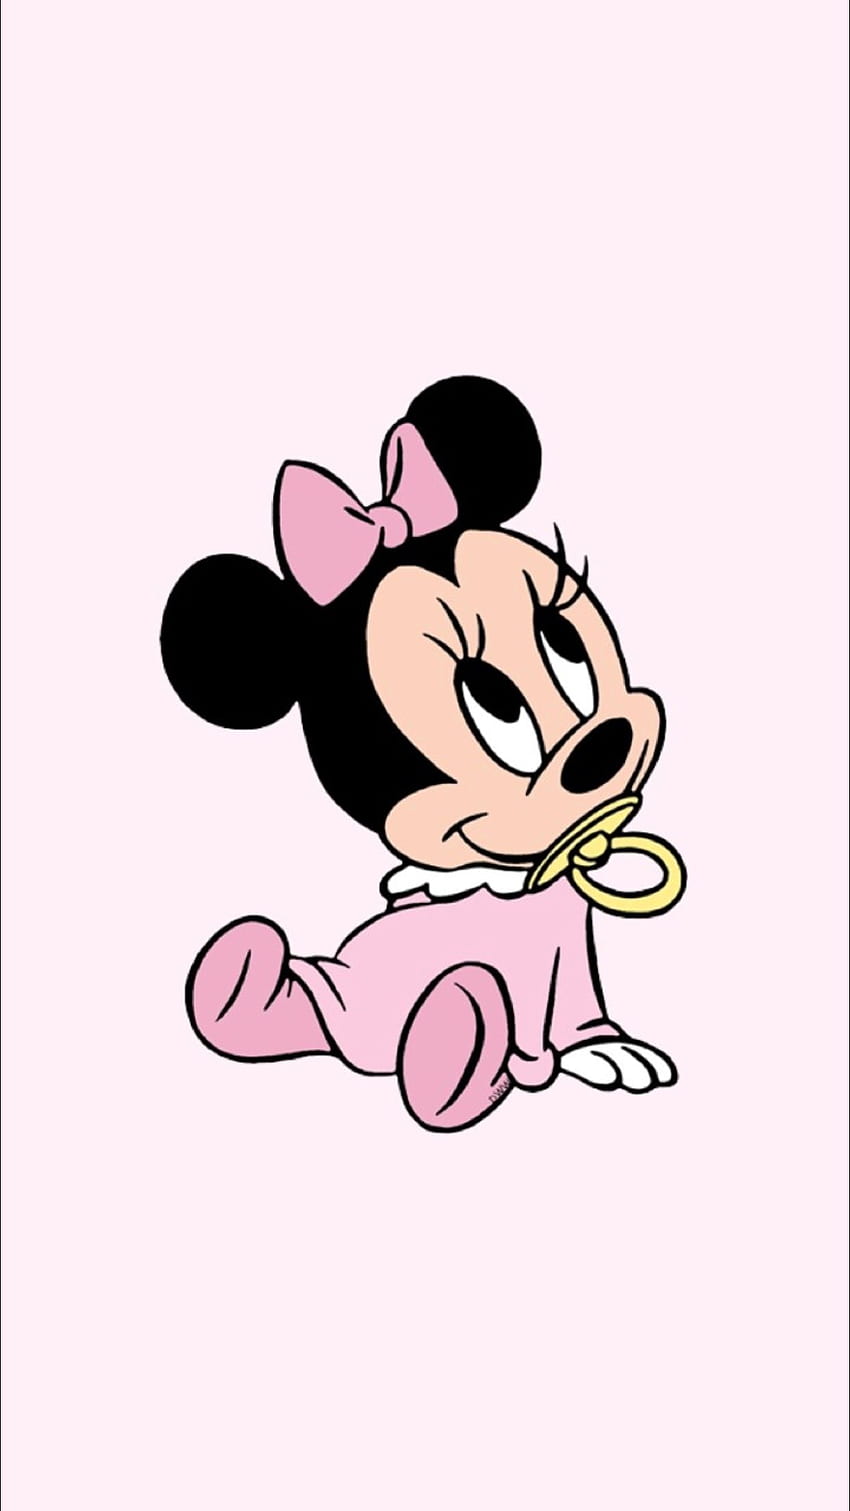 Minnie Mouse Wallpaper Discover more android background iphone Lock  Screen Pink wallpaper httpswwwnawpiccomminniemouse8  Minnie Minnie  mouse Disney